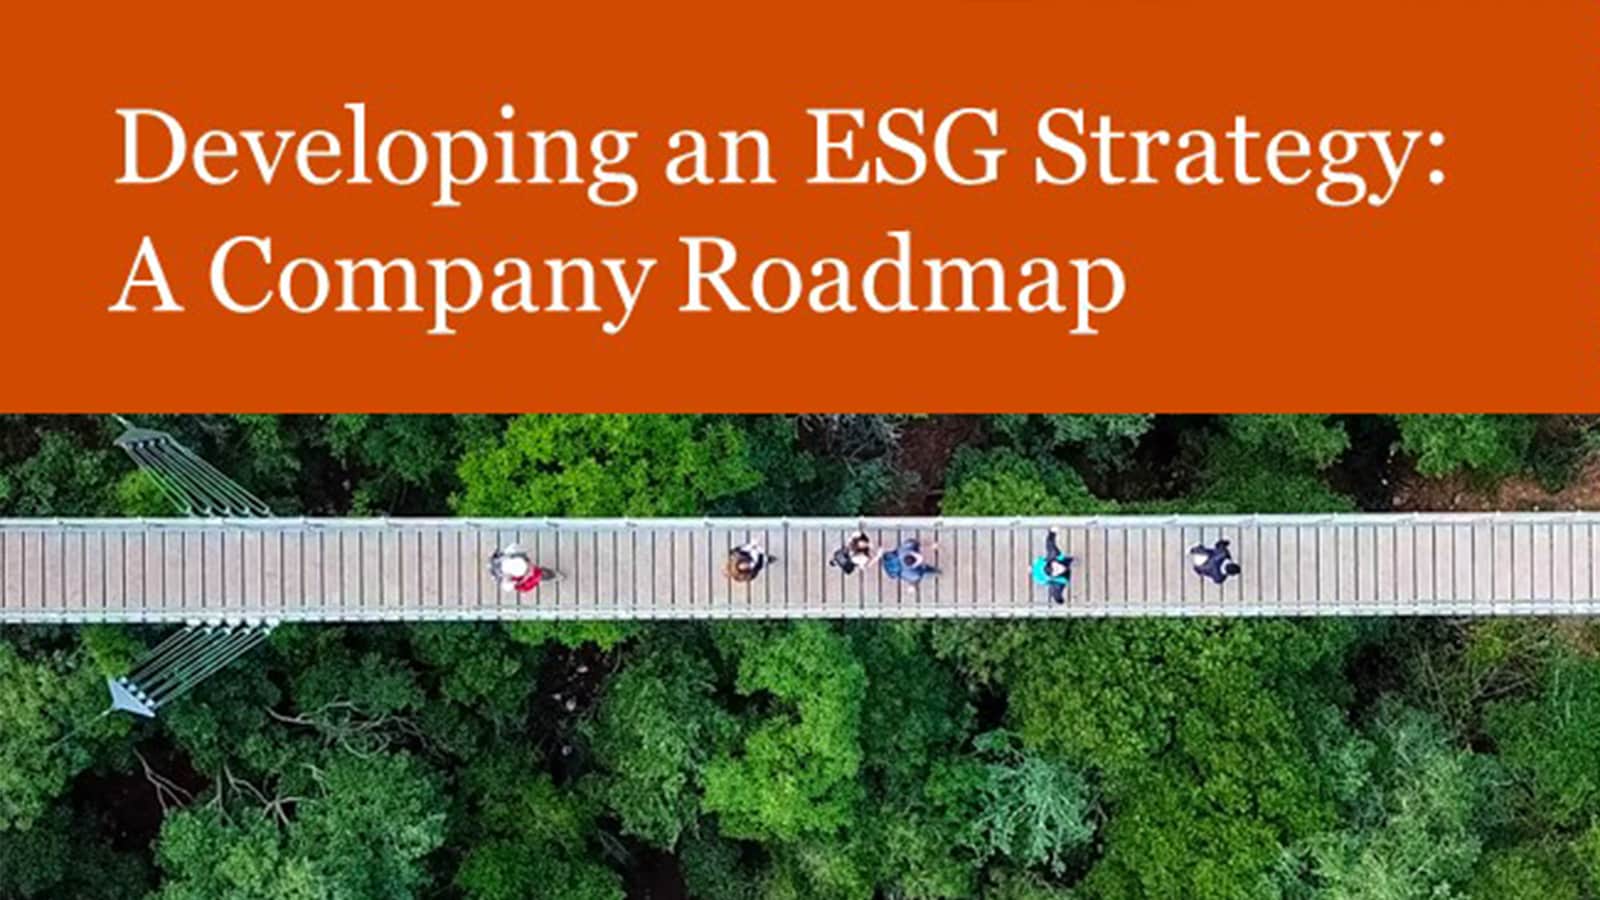 ESG strategy held for publicly listed companies